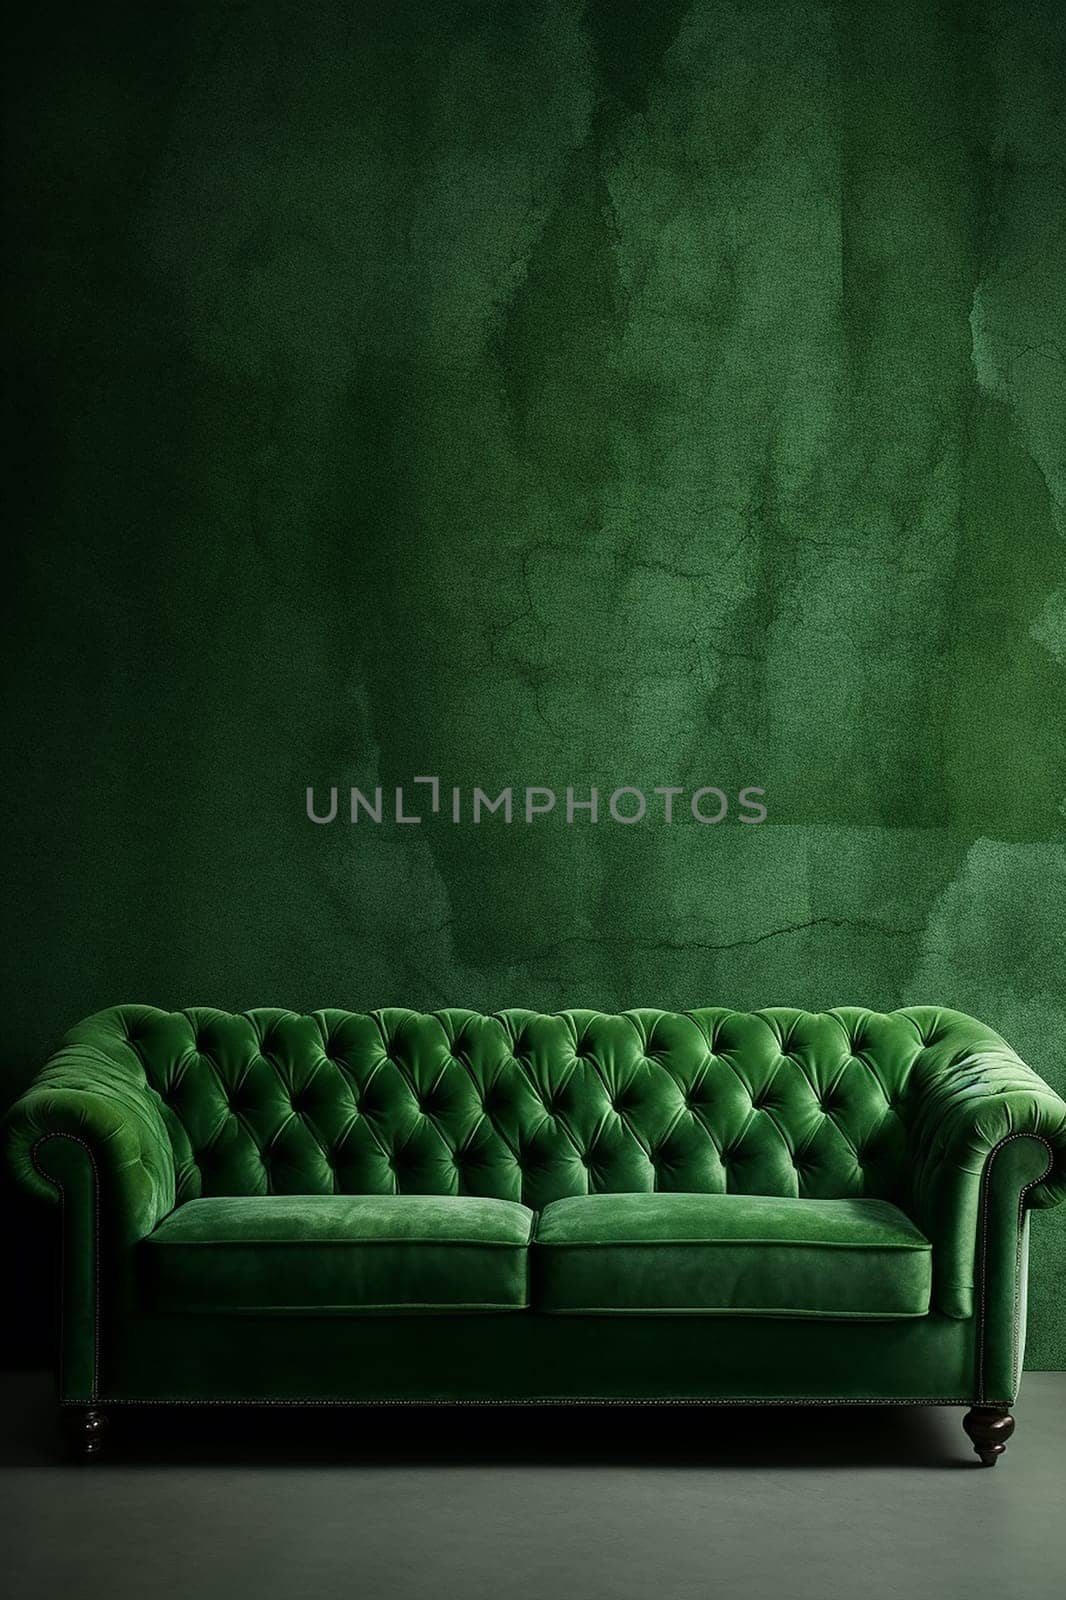 Elegant green velvet sofa against a textured green wall, with minimalist and luxury interior design concept.